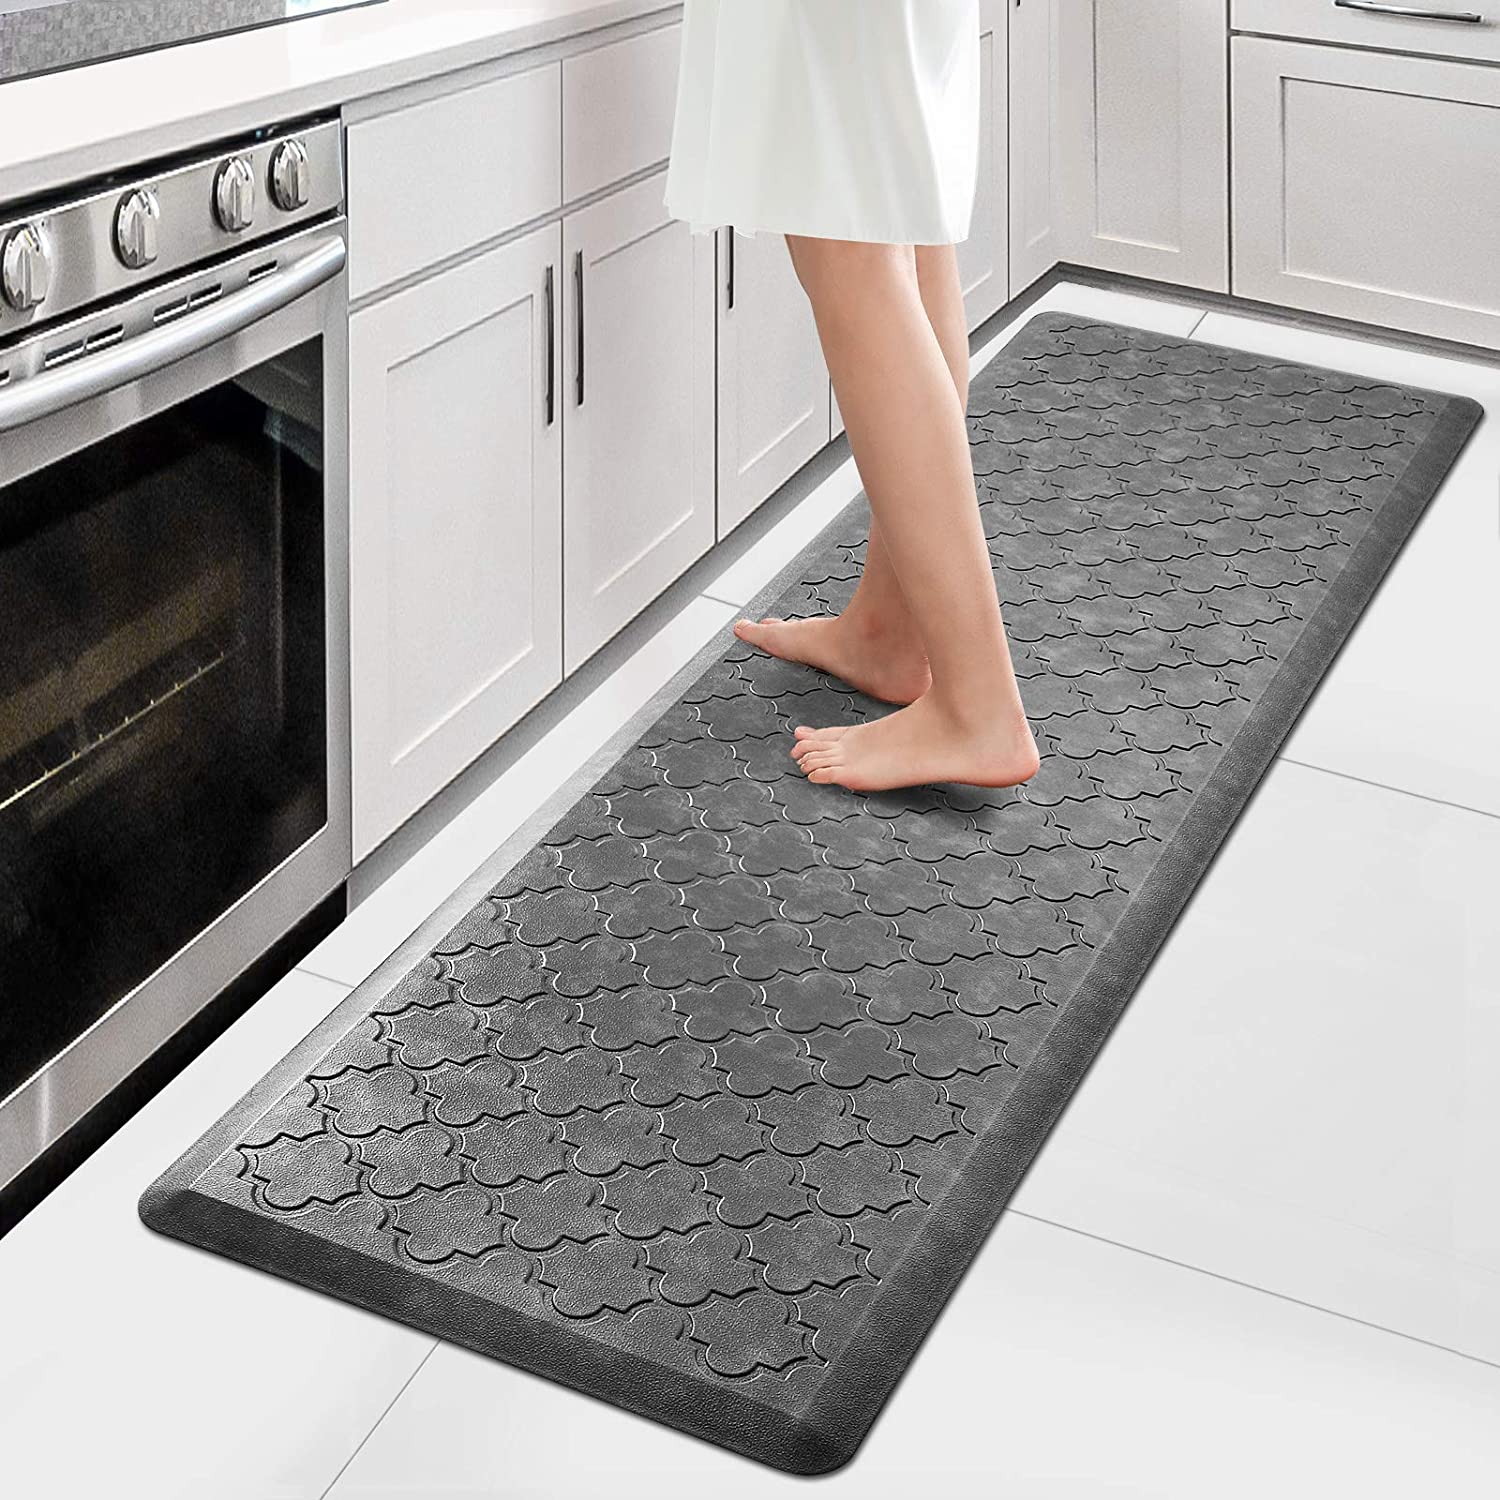 Top 20 Best Extra large anti fatigue kitchen mats - Mats For Kitchen